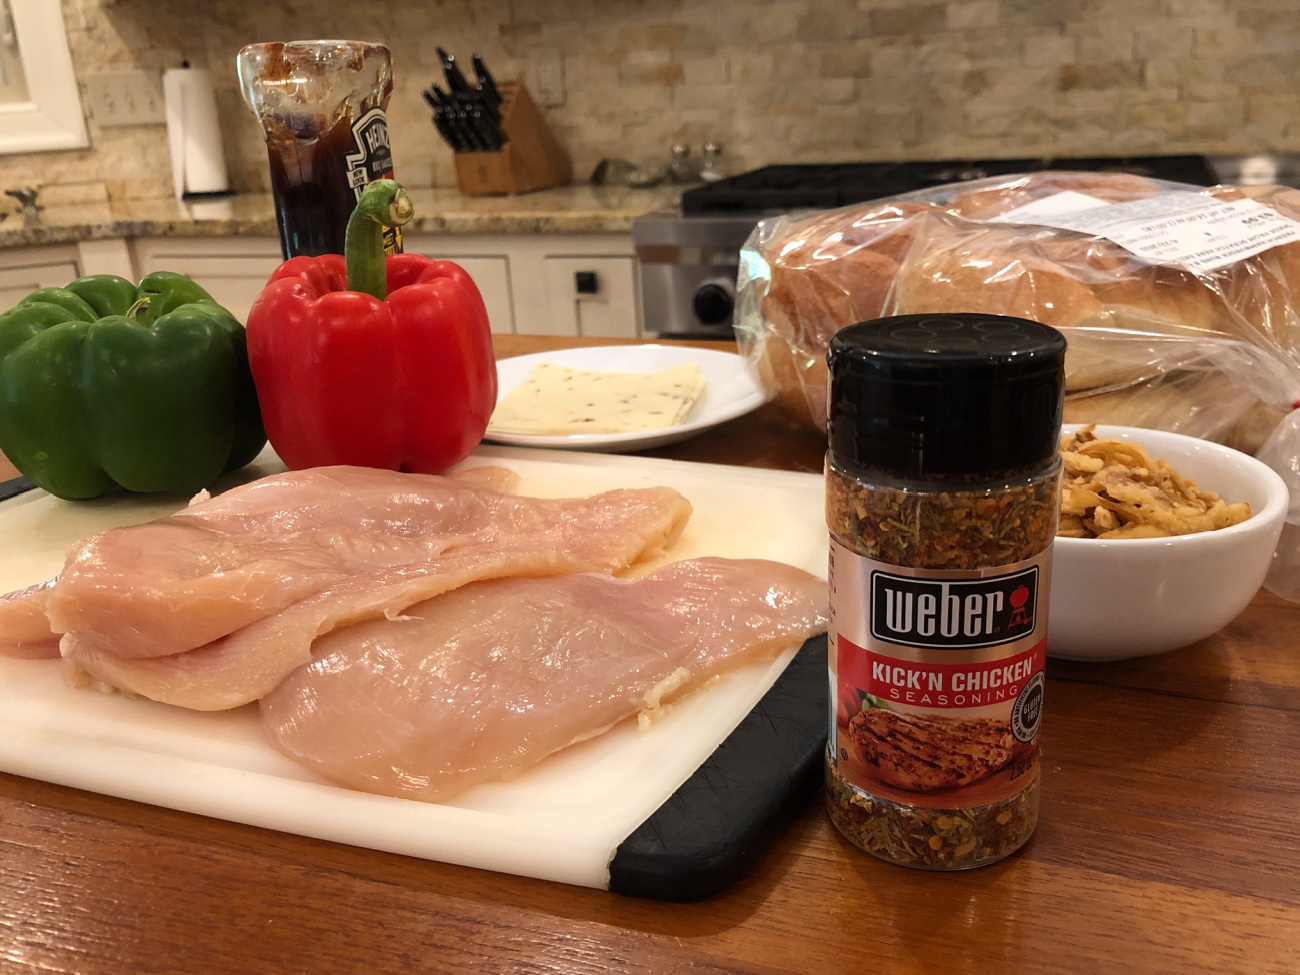 Spice Up Your Meals With Weber Seasoning - Try My Kick’n Chicken Sandwich! on I Heart Publix 1